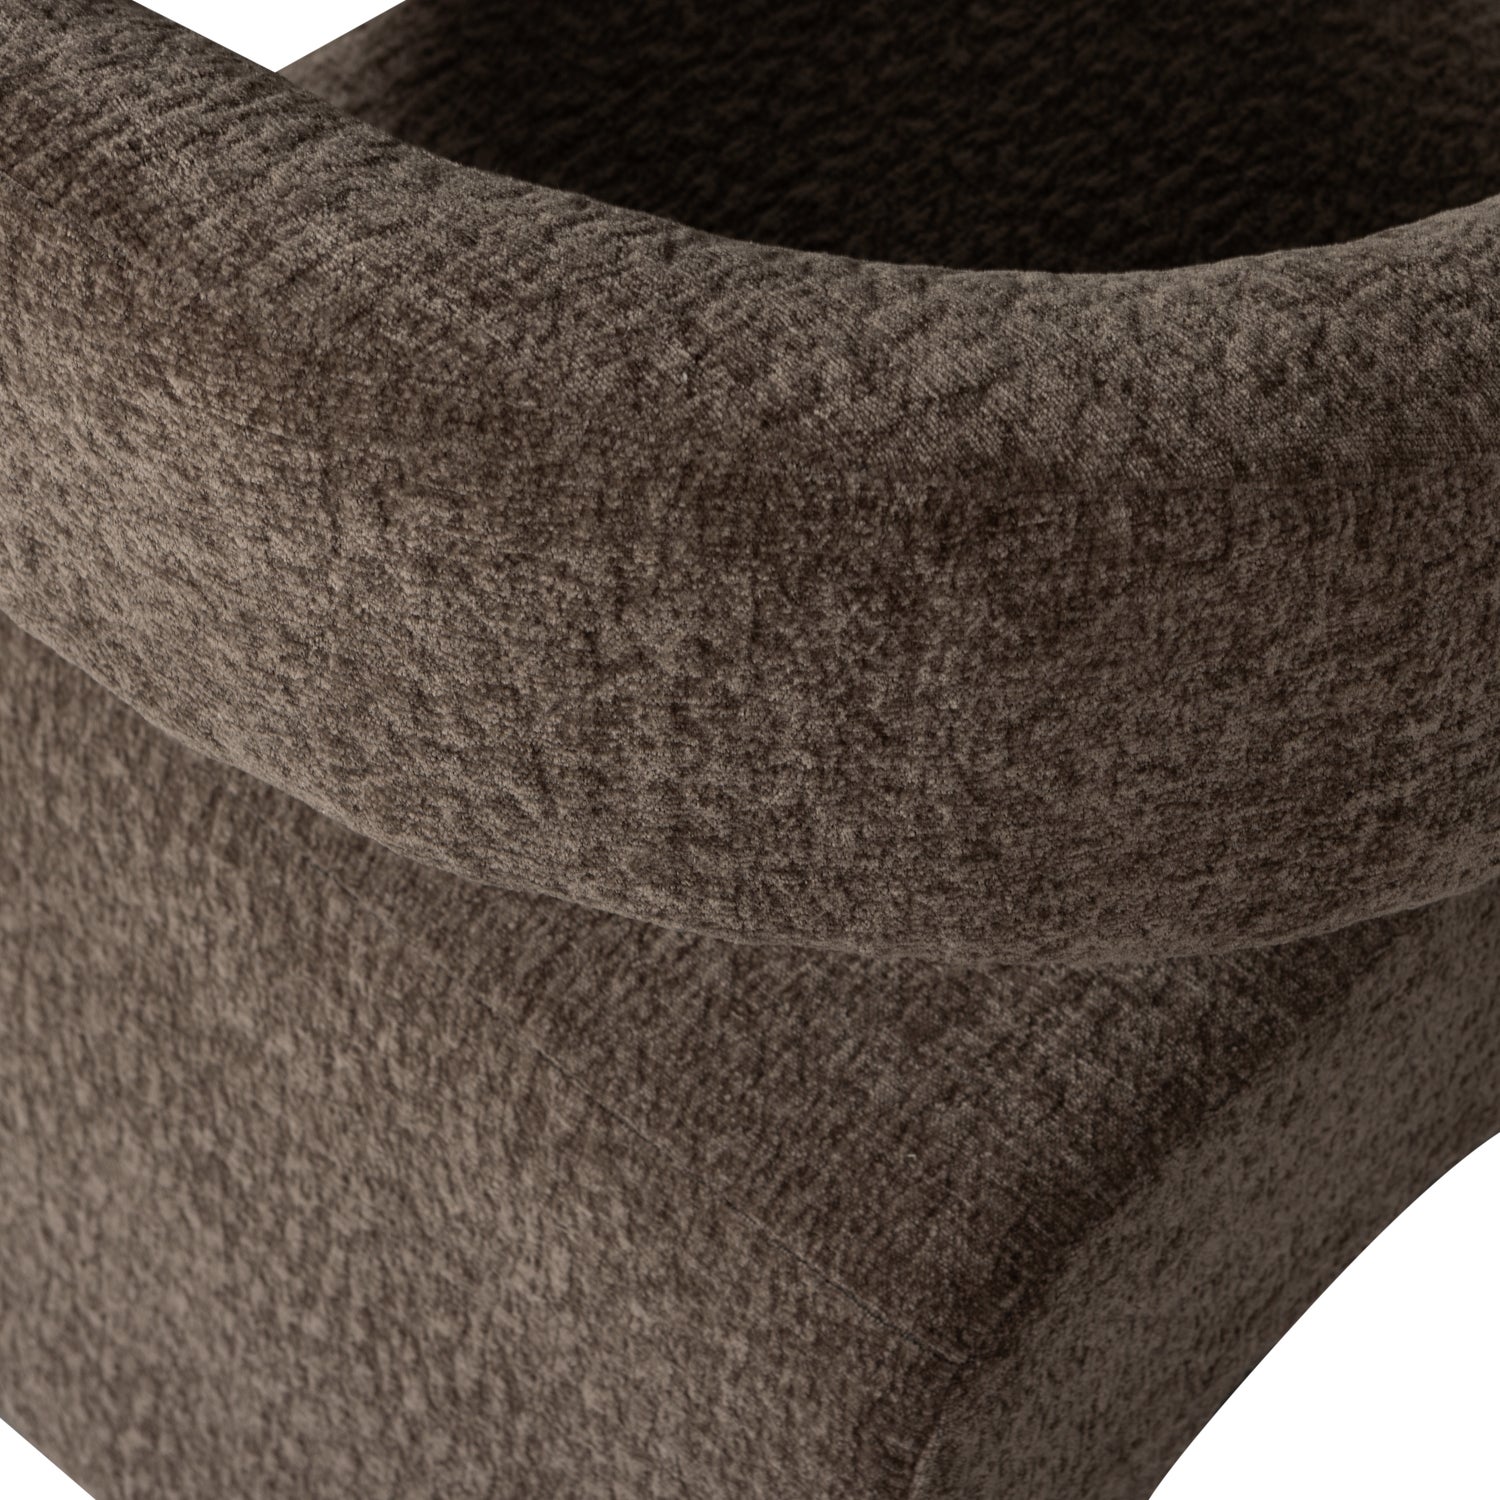 801432-E-01_VS_BP_Radiate_fauteuil_textured_espresso_detail.png?auto=webp&format=png&width=1500&height=1500